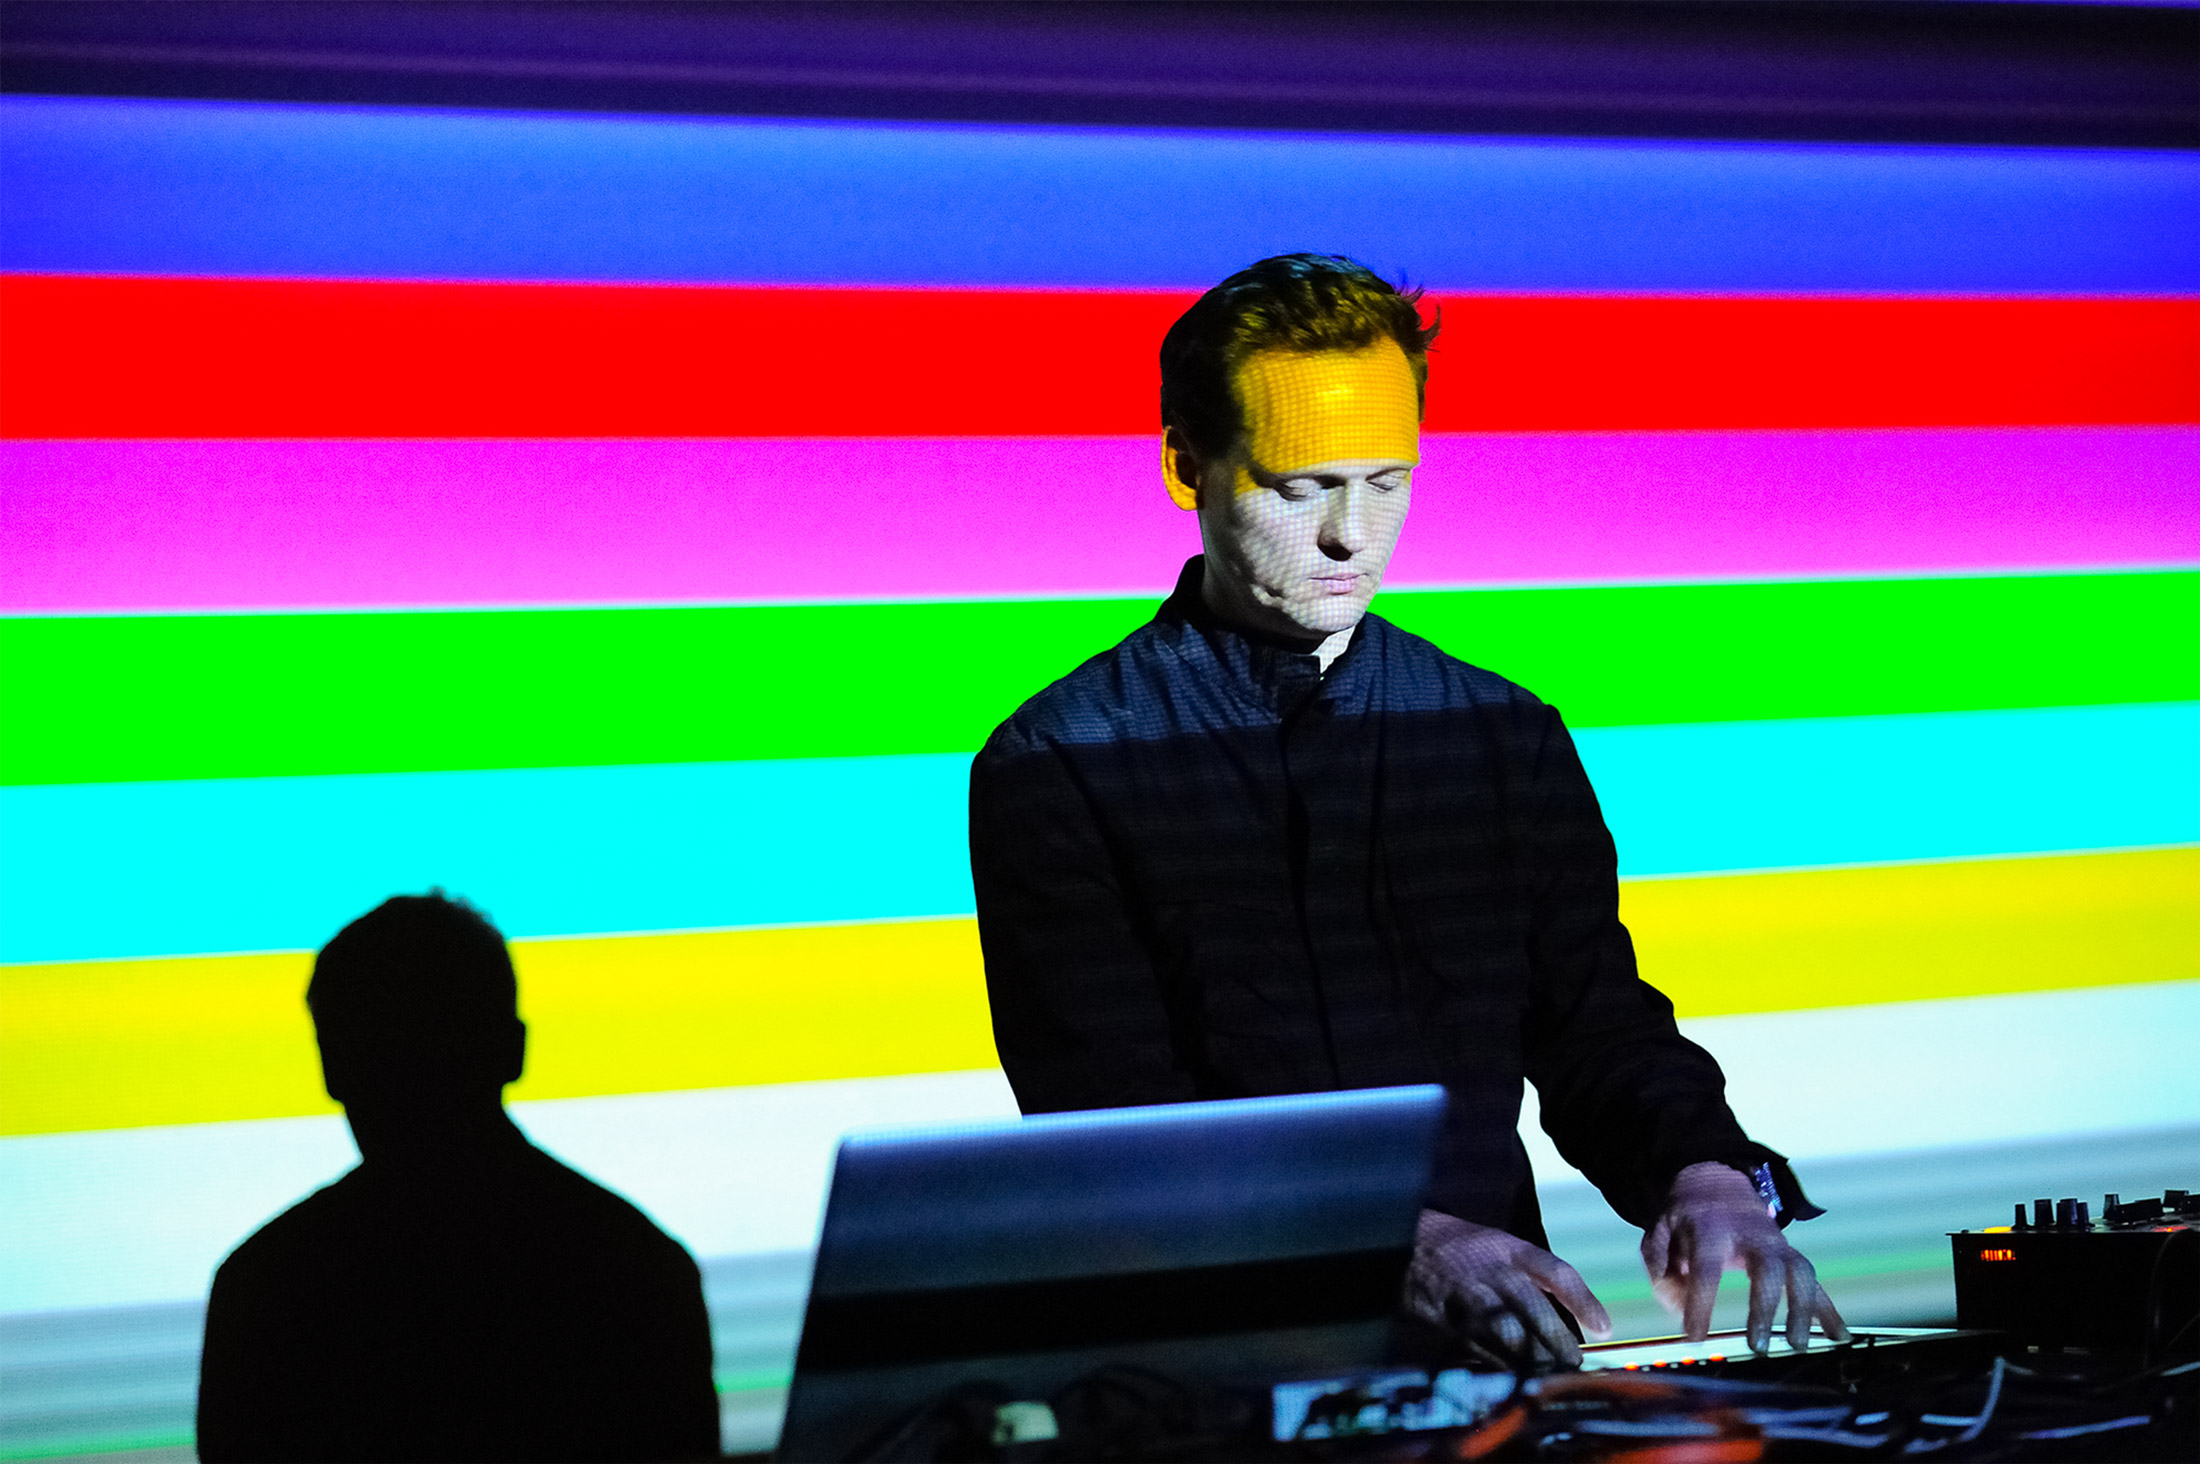 Shows Carsten playing music from a laptop in the middle, wearing a black shirt. Then the background is a bright blue, red, green, light green and yellow stripped background, like a TV error screen.